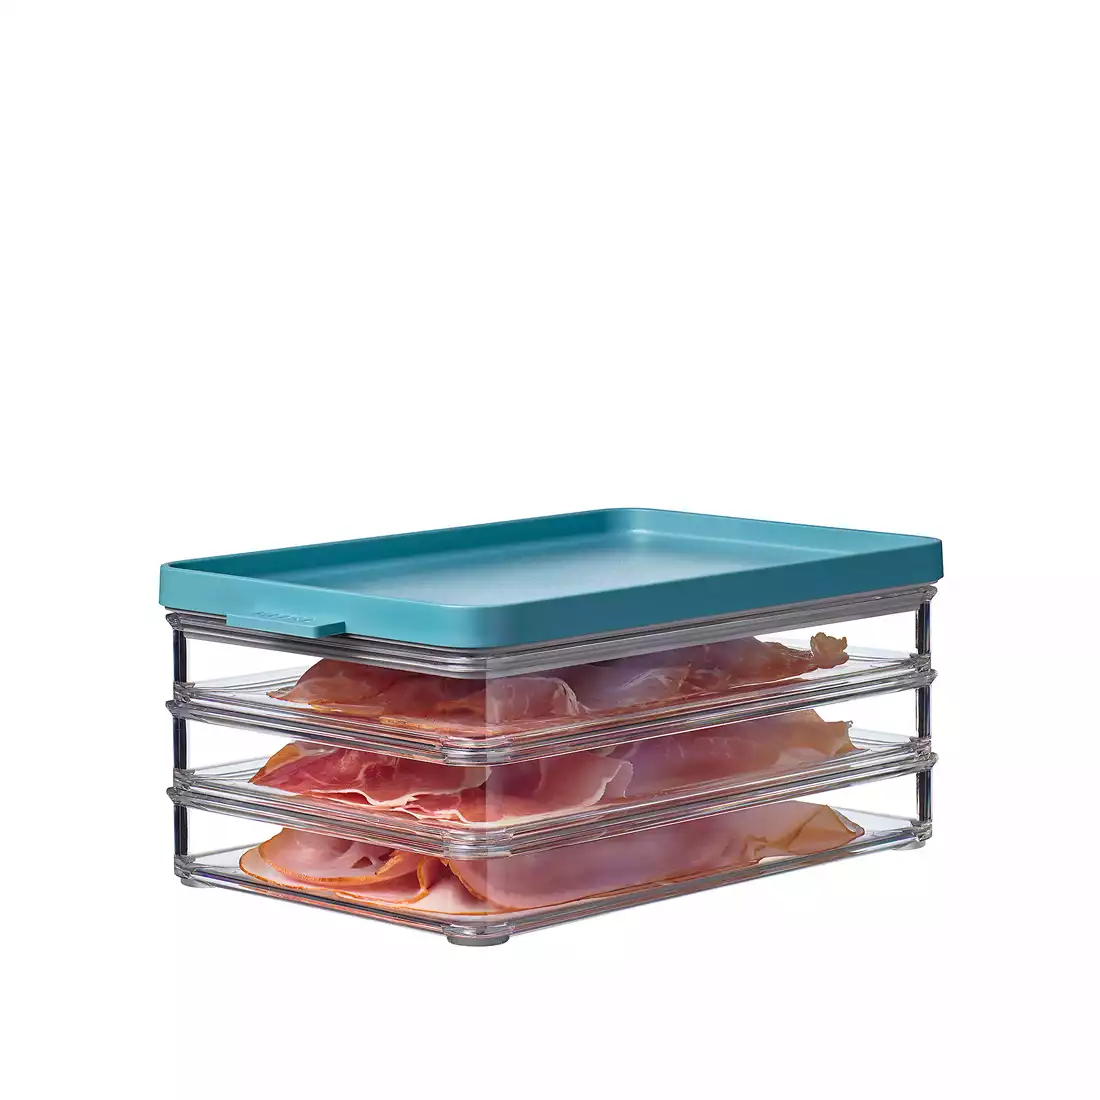 MEPAL OMNIA cold cuts container 500/3, nordic green